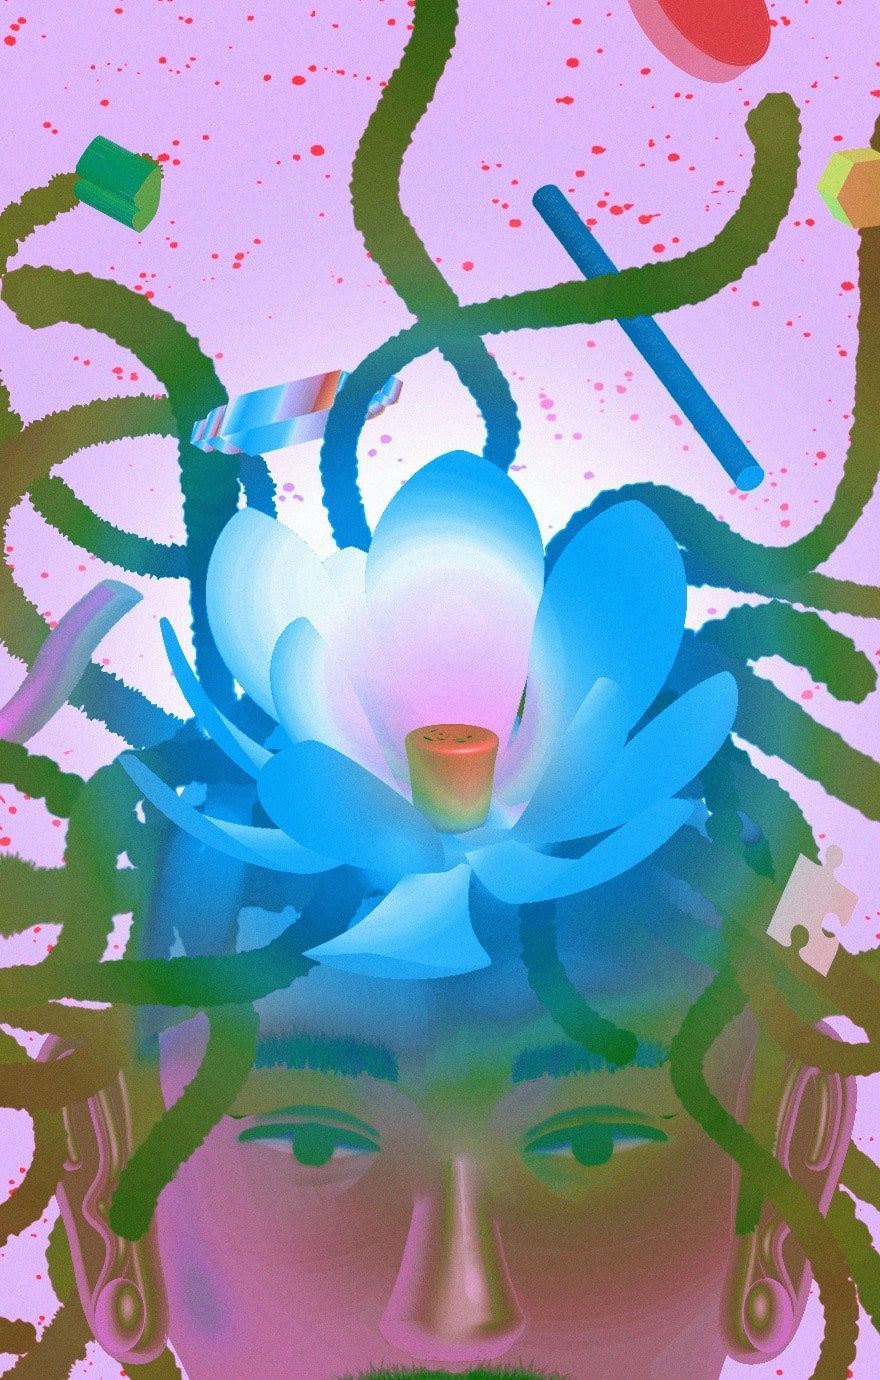 An illustration of a woman with a blue flower in her hair and a pink background. - Psychedelic